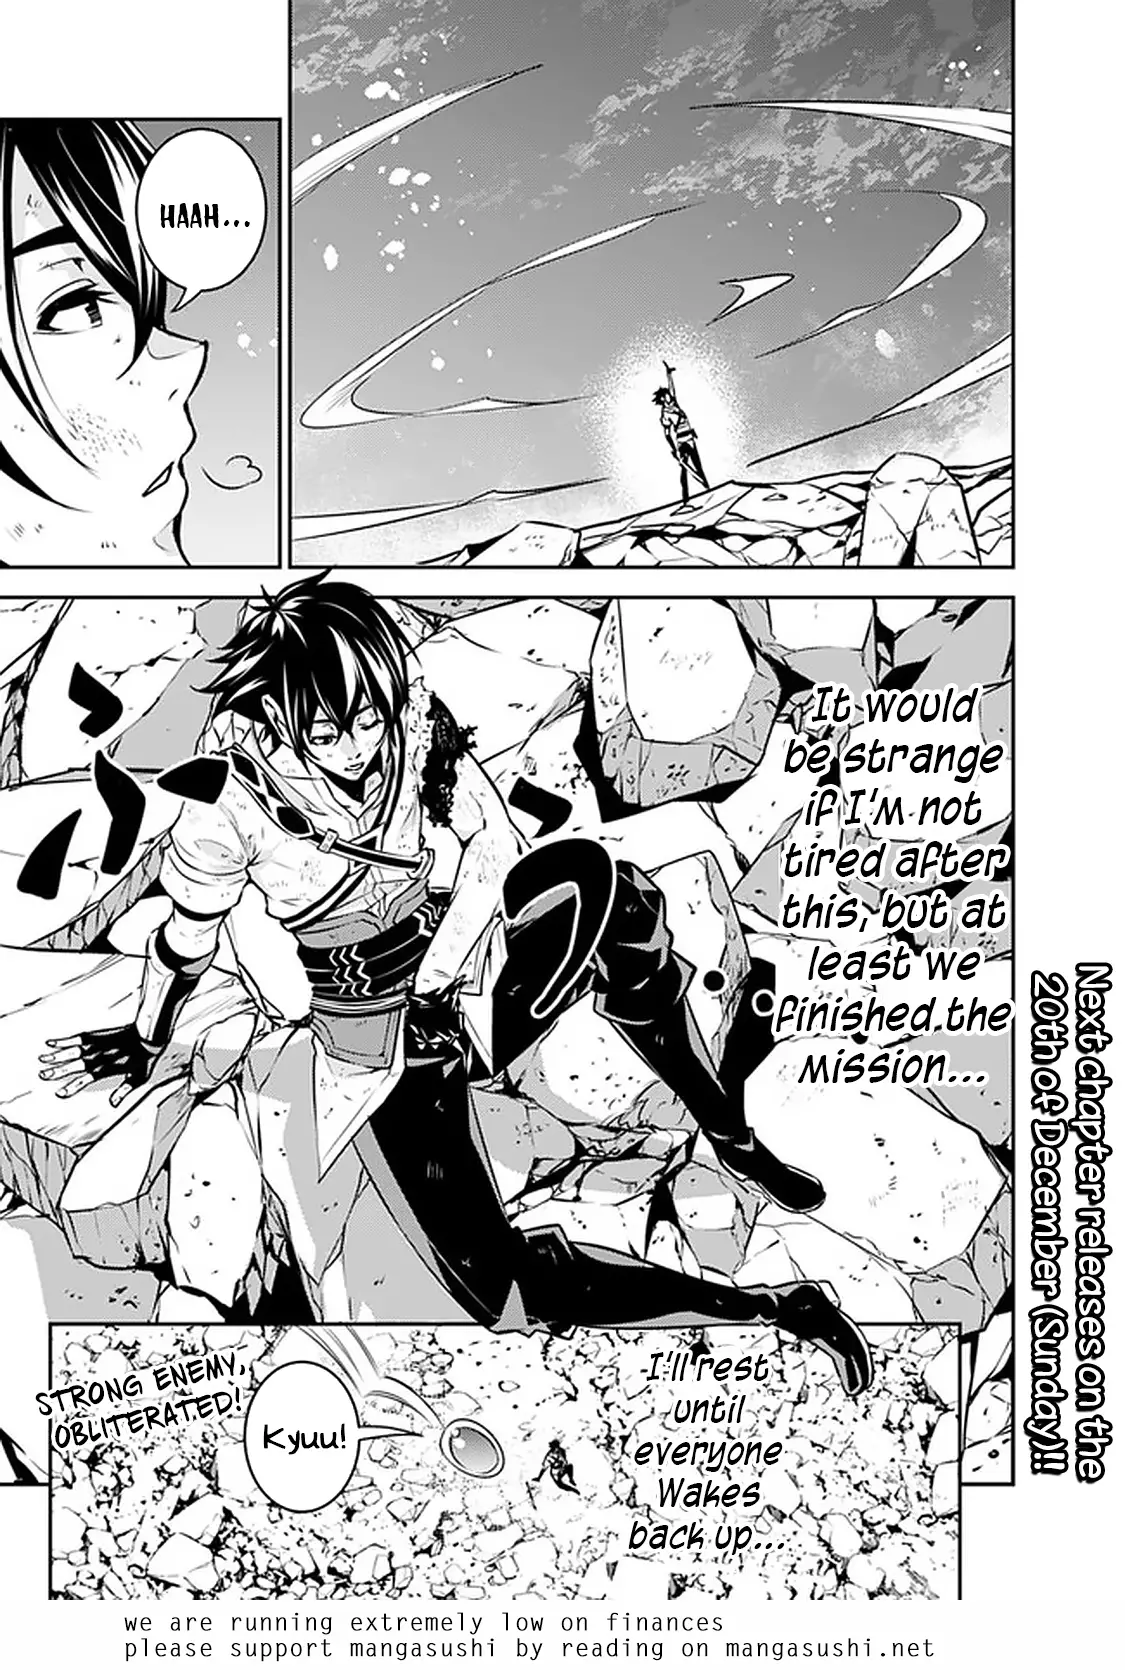 The Strongest Magical Swordsman Ever Reborn As An F-Rank Adventurer. - 35 page 24